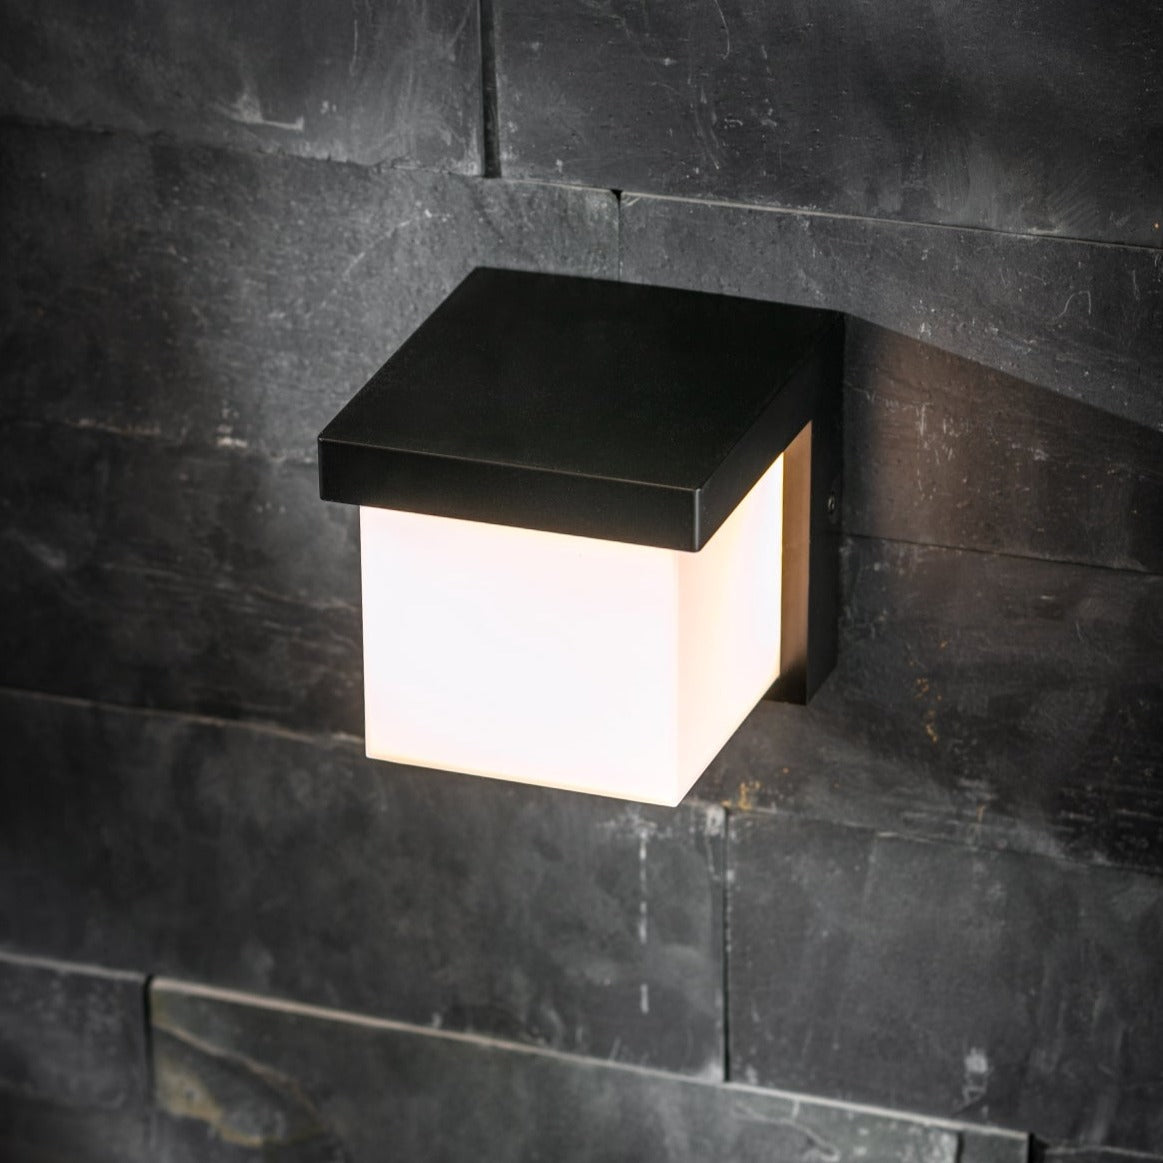 Our Addison black plastic ABS plastic outdoor wall mounted square outdoor light with built in LED's and motion sensor would look perfect in a modern or more traditional home design. Outside wall lights can provide atmospheric light in your garden, at the front door or on the terrace as well as a great security solution. It is designed for durability and longevity with its robust material producing a fully weatherproof and water resistant light fitting.